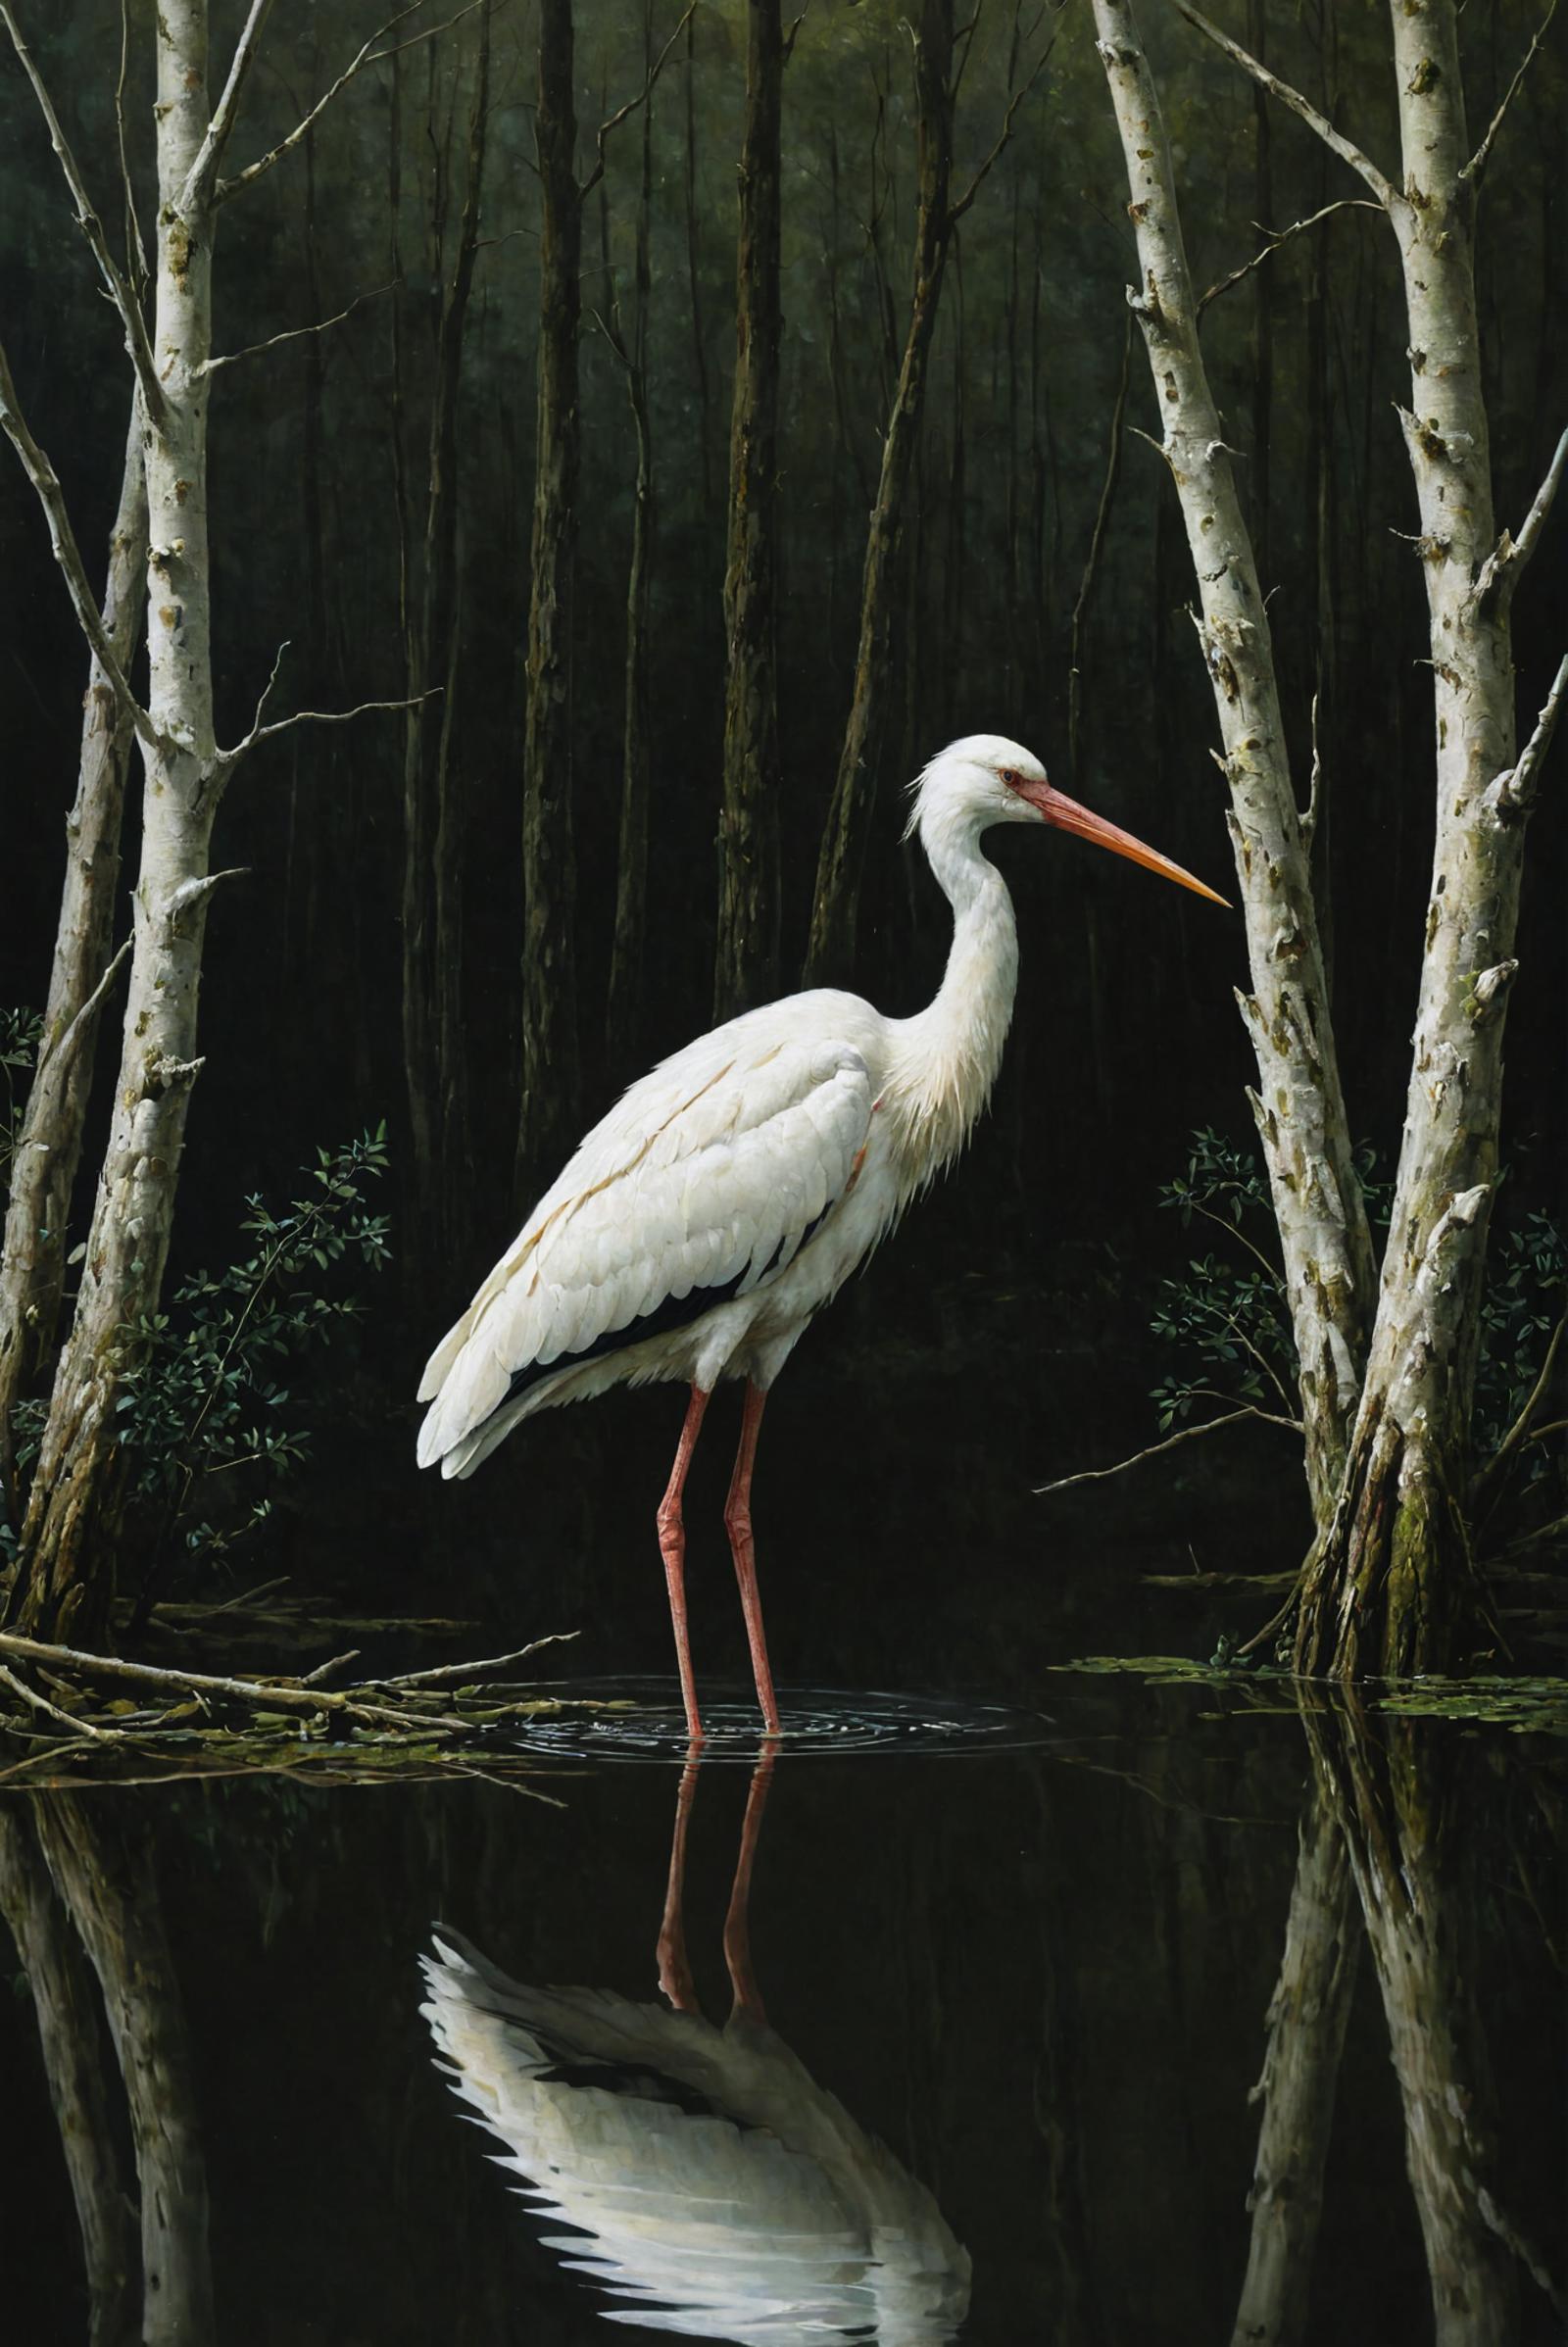 White Bird Standing Tall in Reflection of Water, Surrounded by Trees